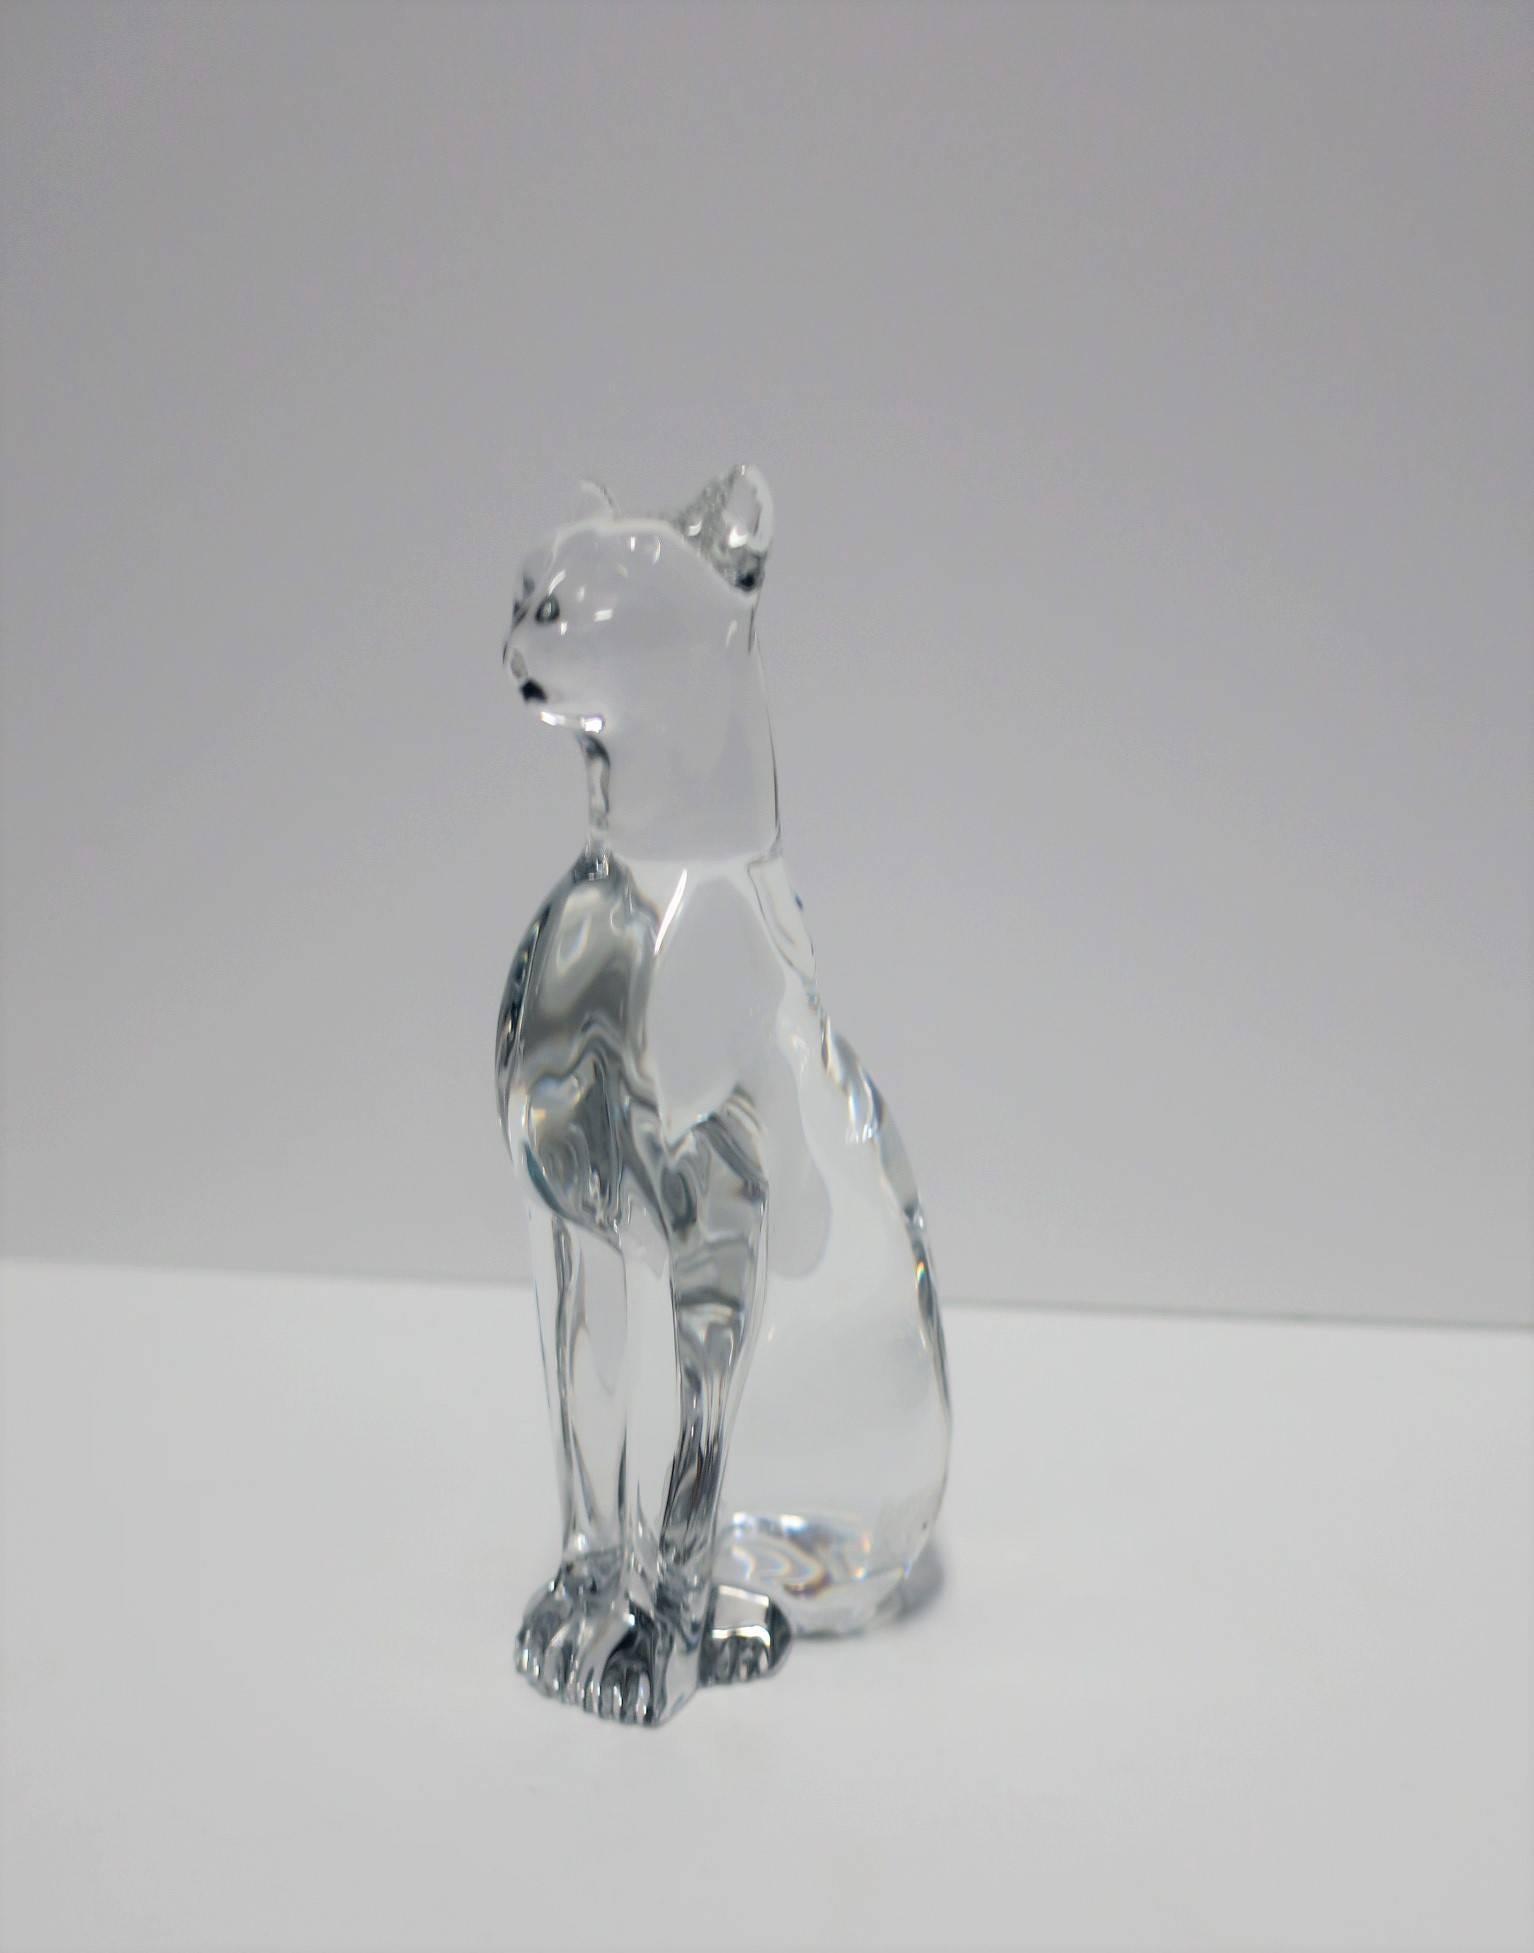 A beautiful Art Deco style Baccarat crystal Cheetah or Panther cat sculpture, made in France. Piece has authentication marker's mark on bottom as show in image #10. Piece is in excellent condition. 

Piece measures: 2 in. W x 2.75 in. D x 6.25